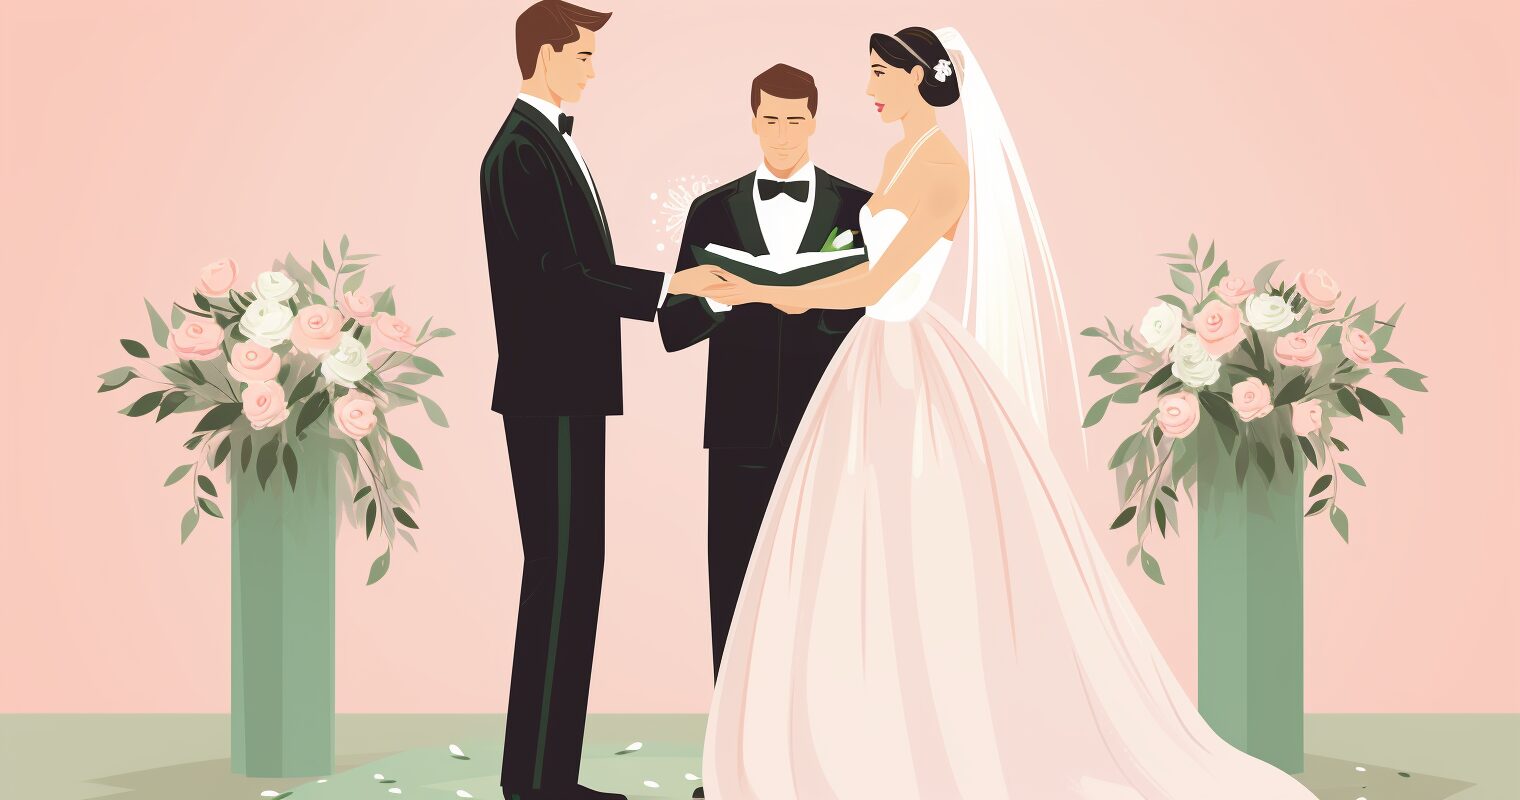 A wedding officiante marries a bride and groom.